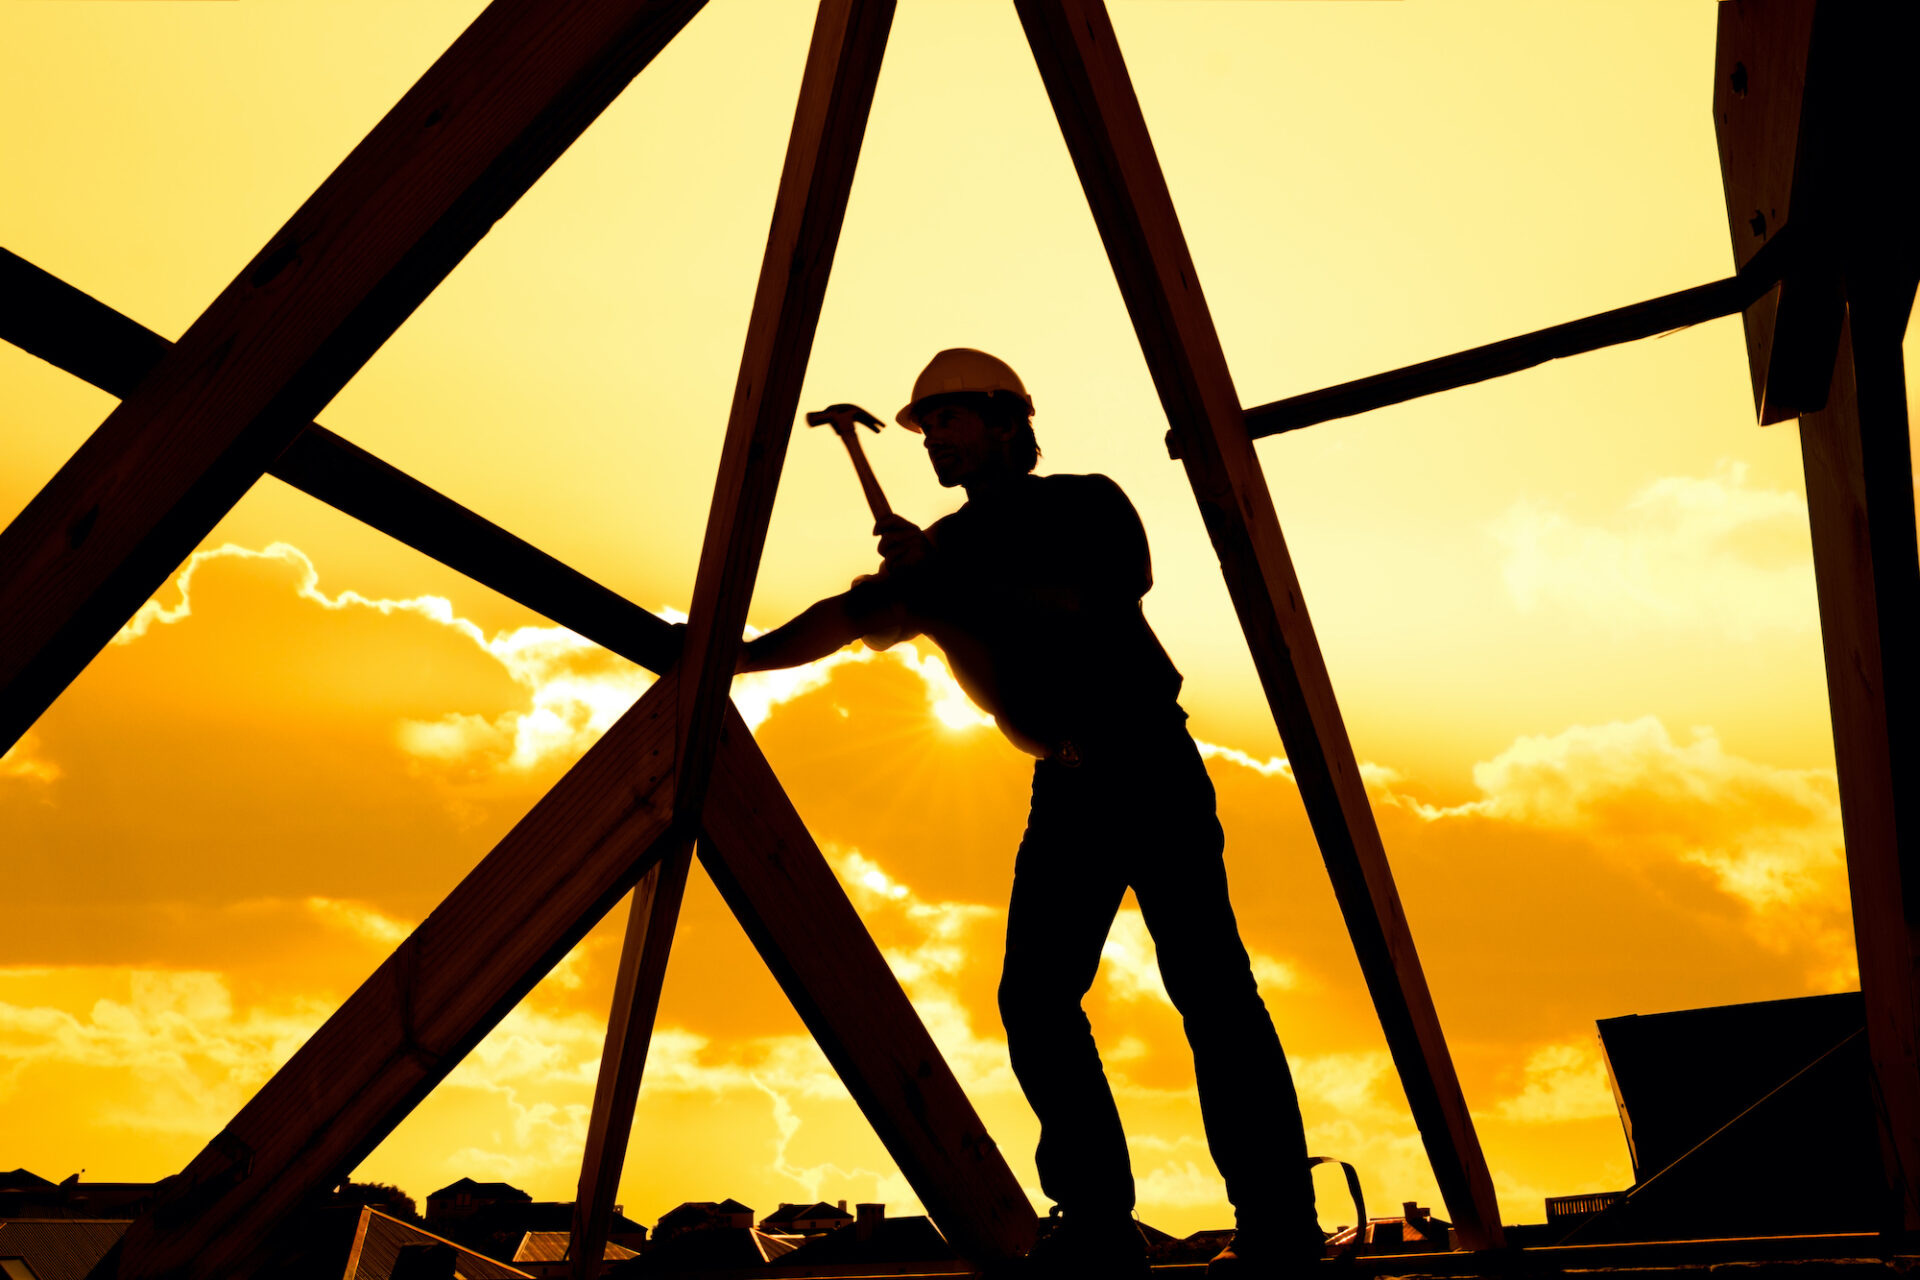 Home Construction Jobs Withstand Pandemic